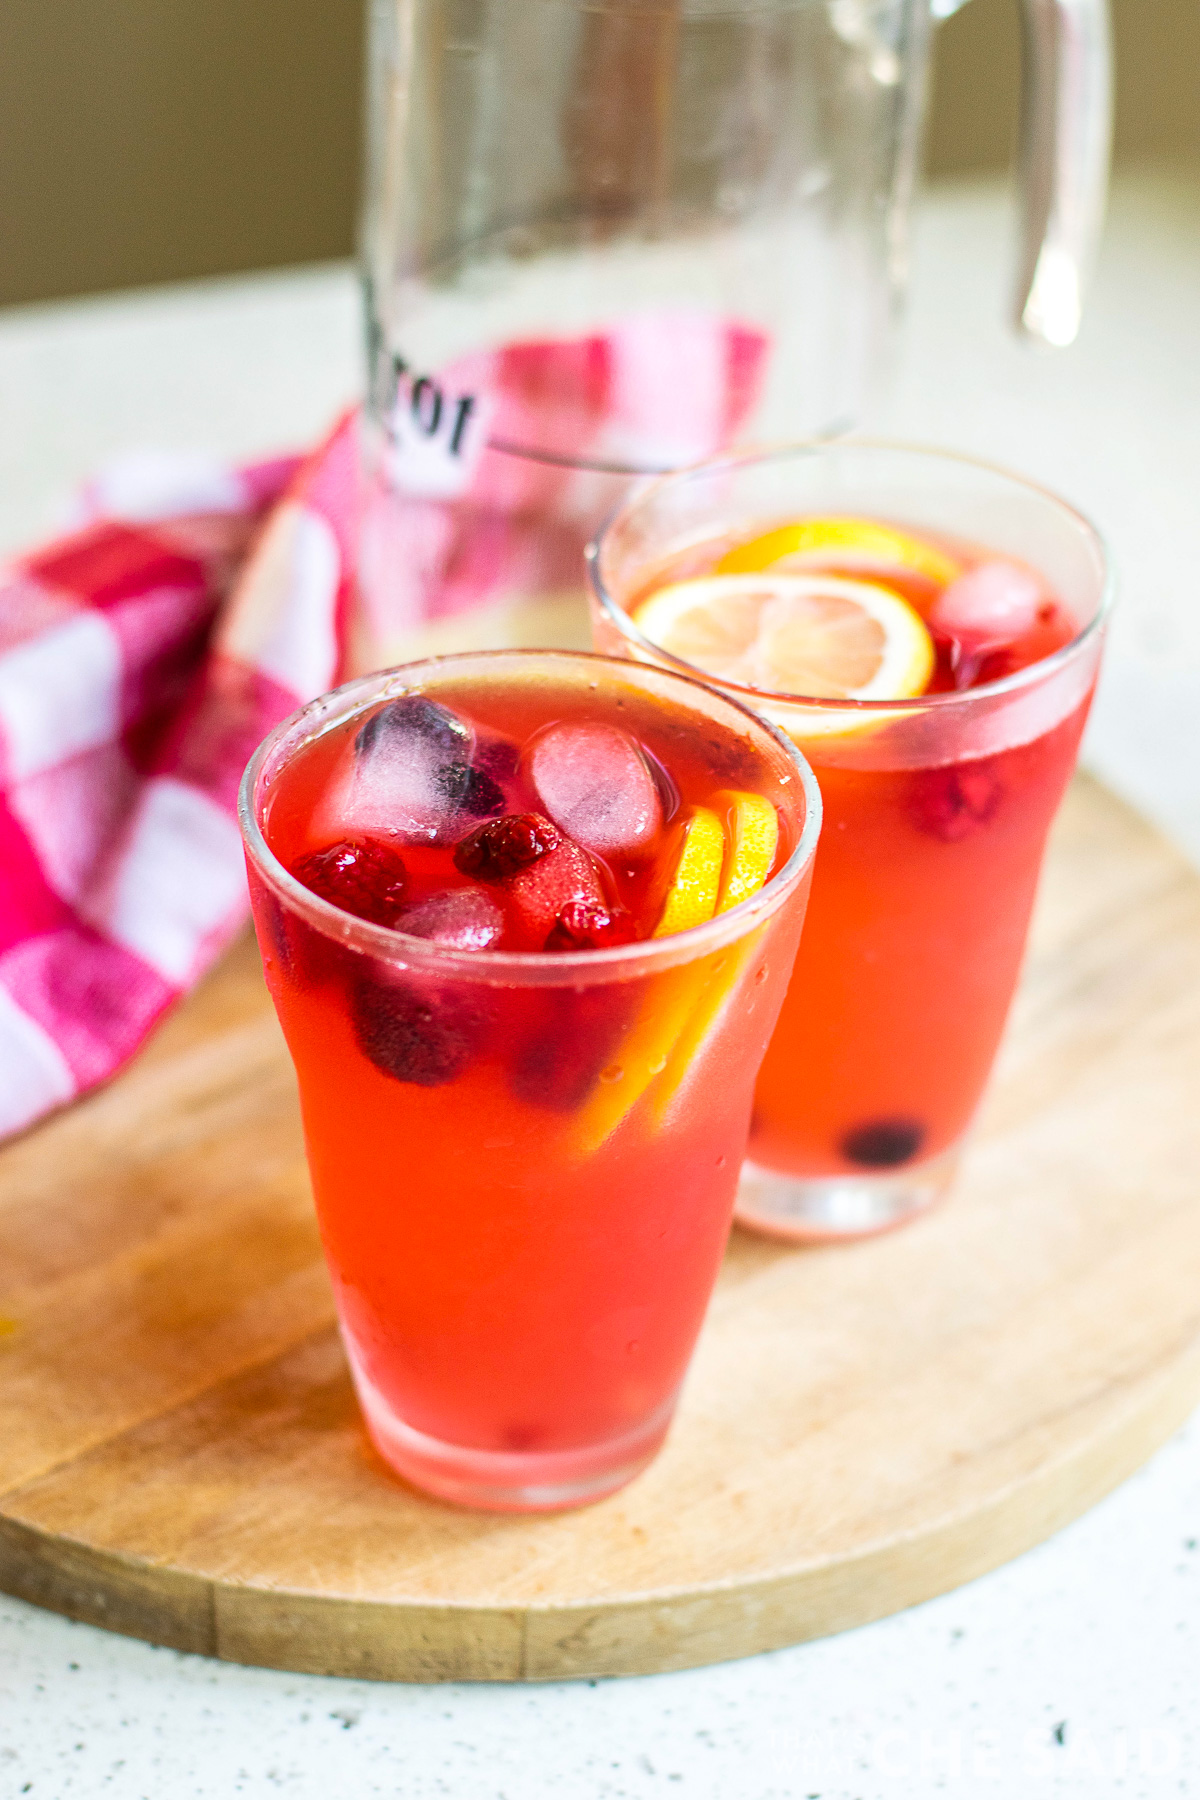 Two cups and a pitcher of finished berry lemonade.